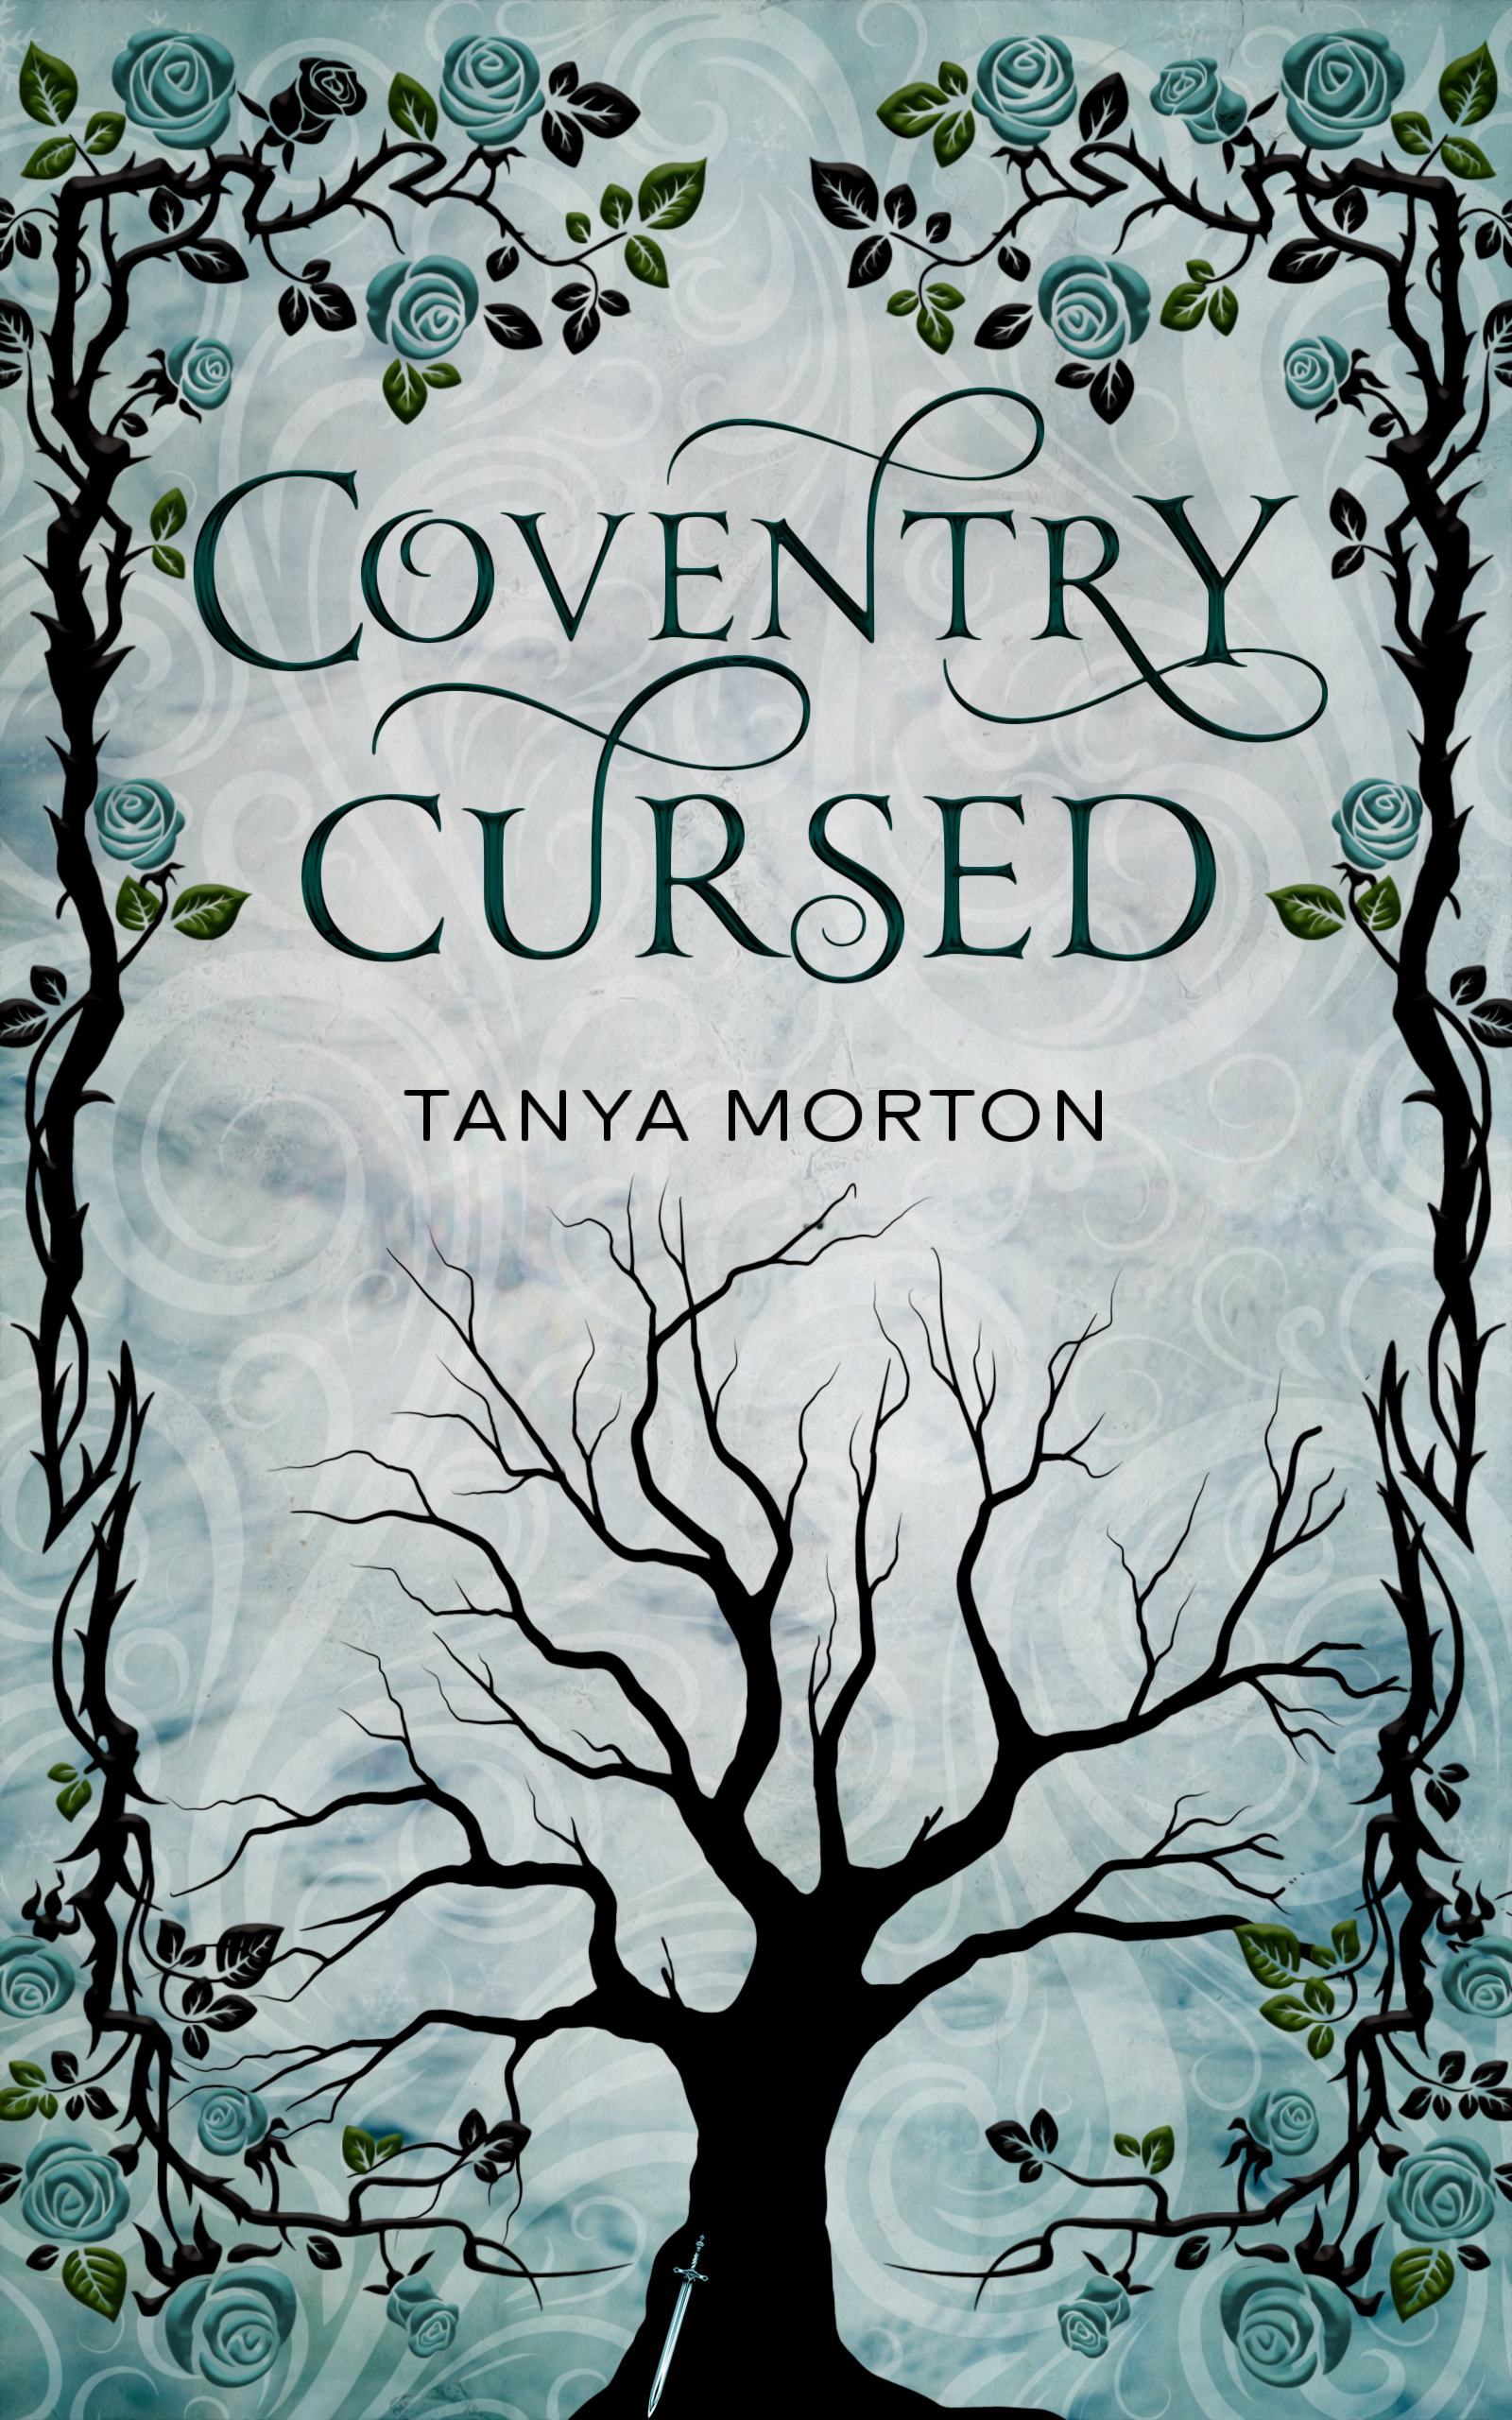 Coventry Cursed, by Tanya Morton